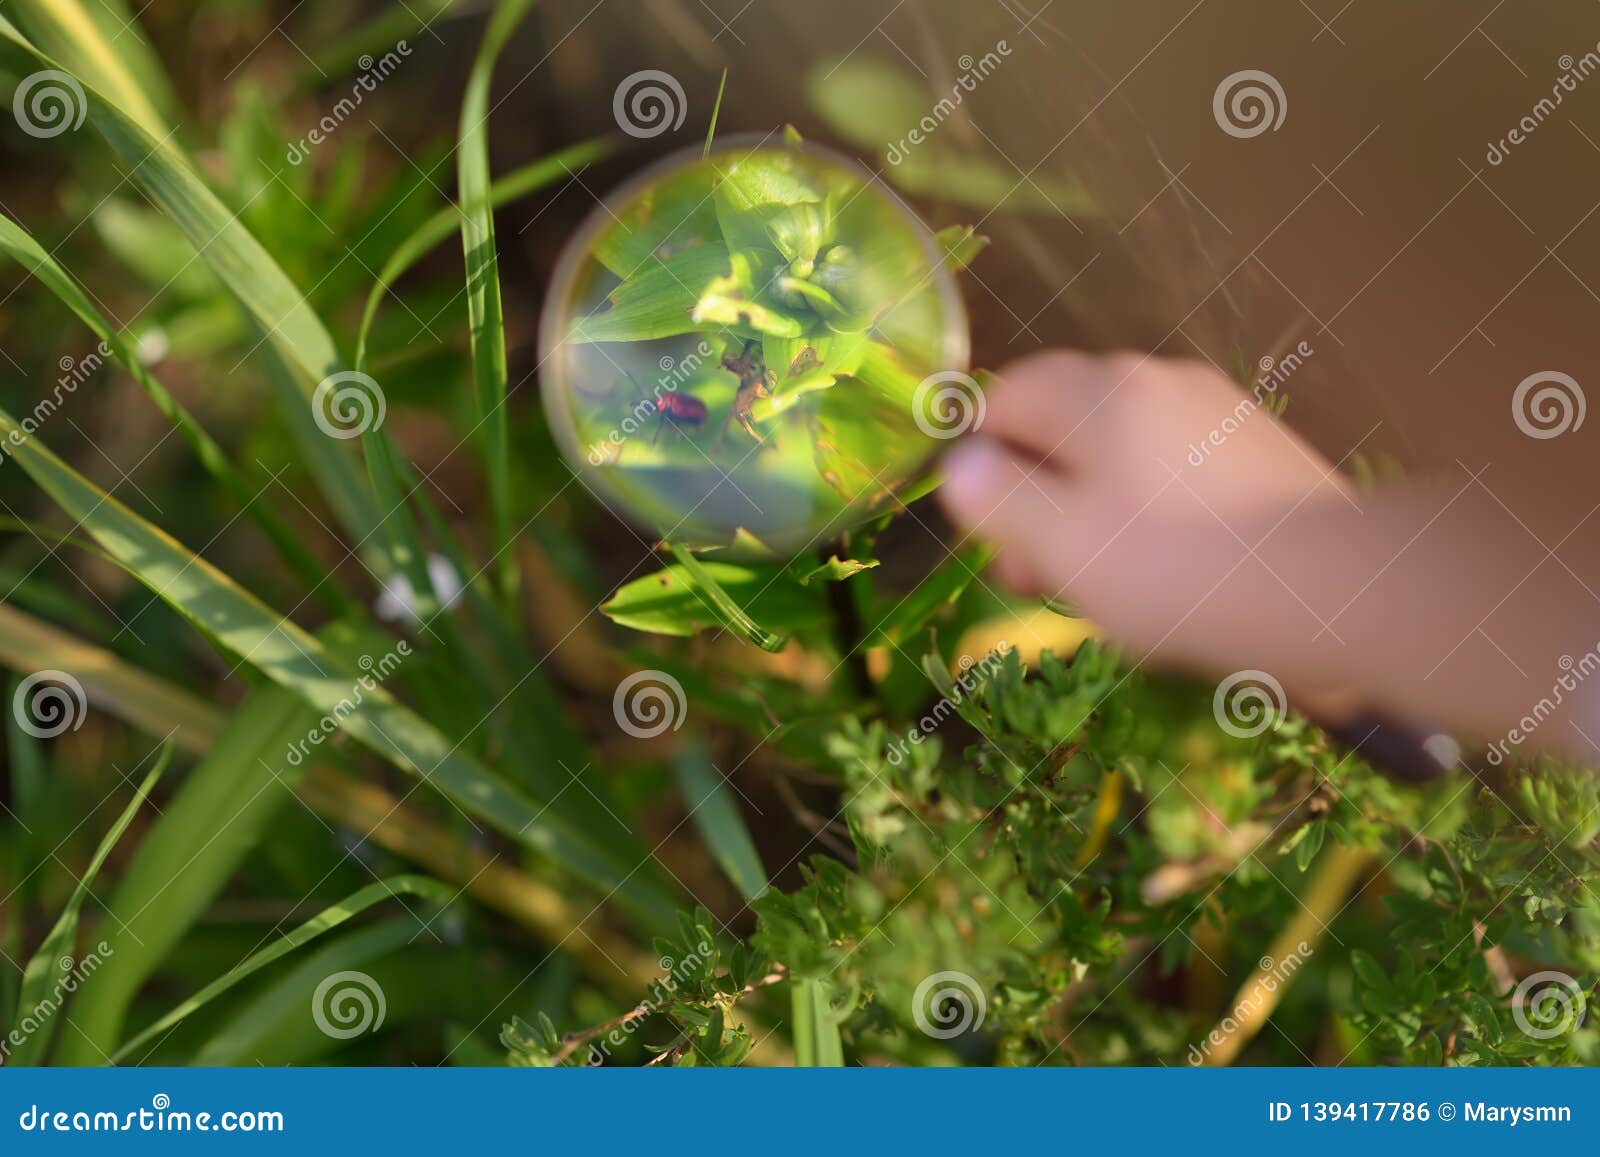 kid exploring nature with magnifying glass. little boy looking at beetle with magnifier. close up